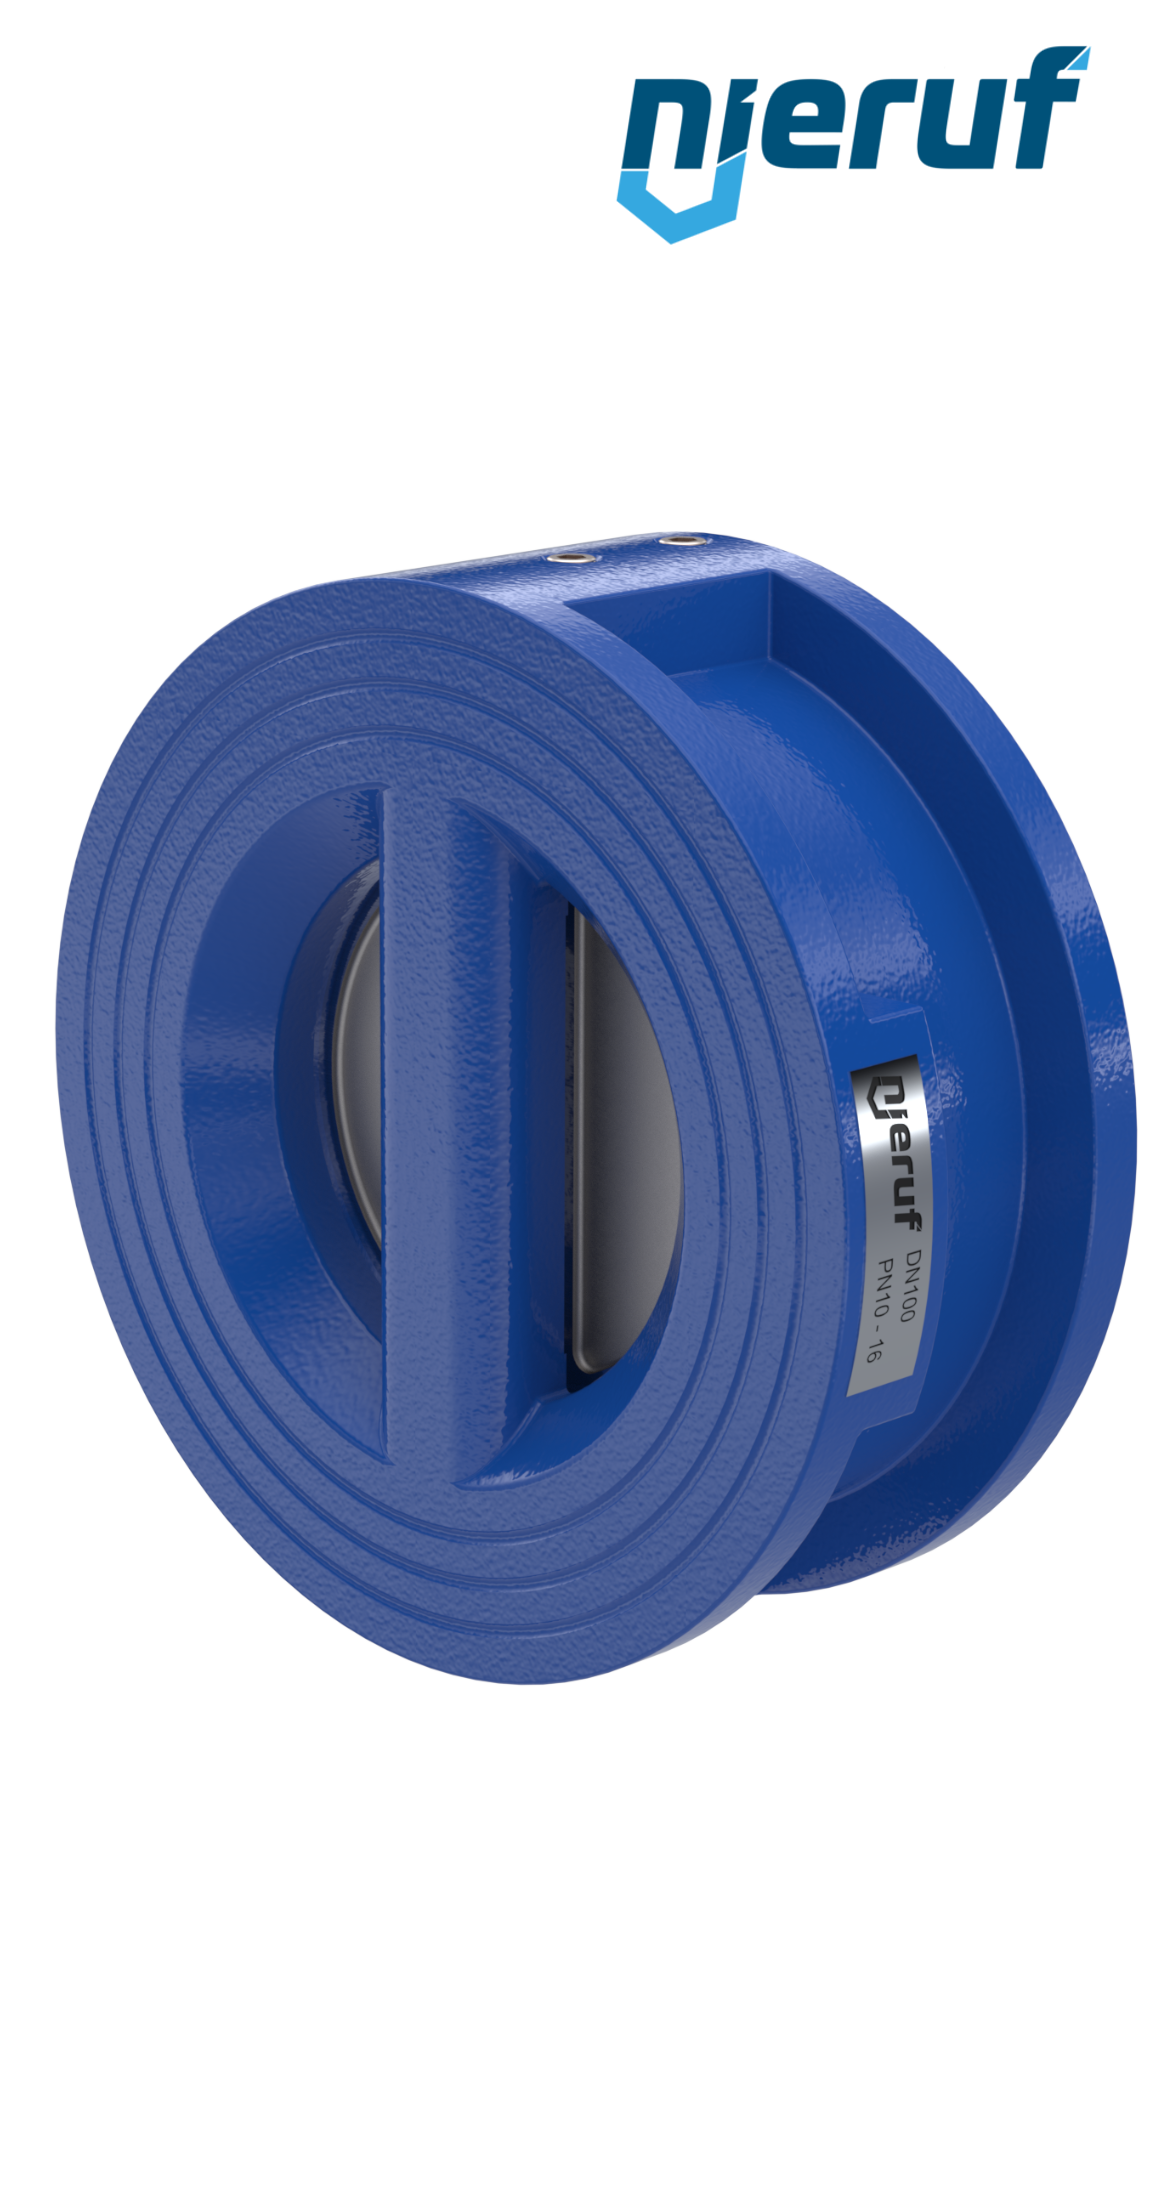 dual plate check valve DN100 DR02 GGG40 epoxyd plated blue 180µm EPDM